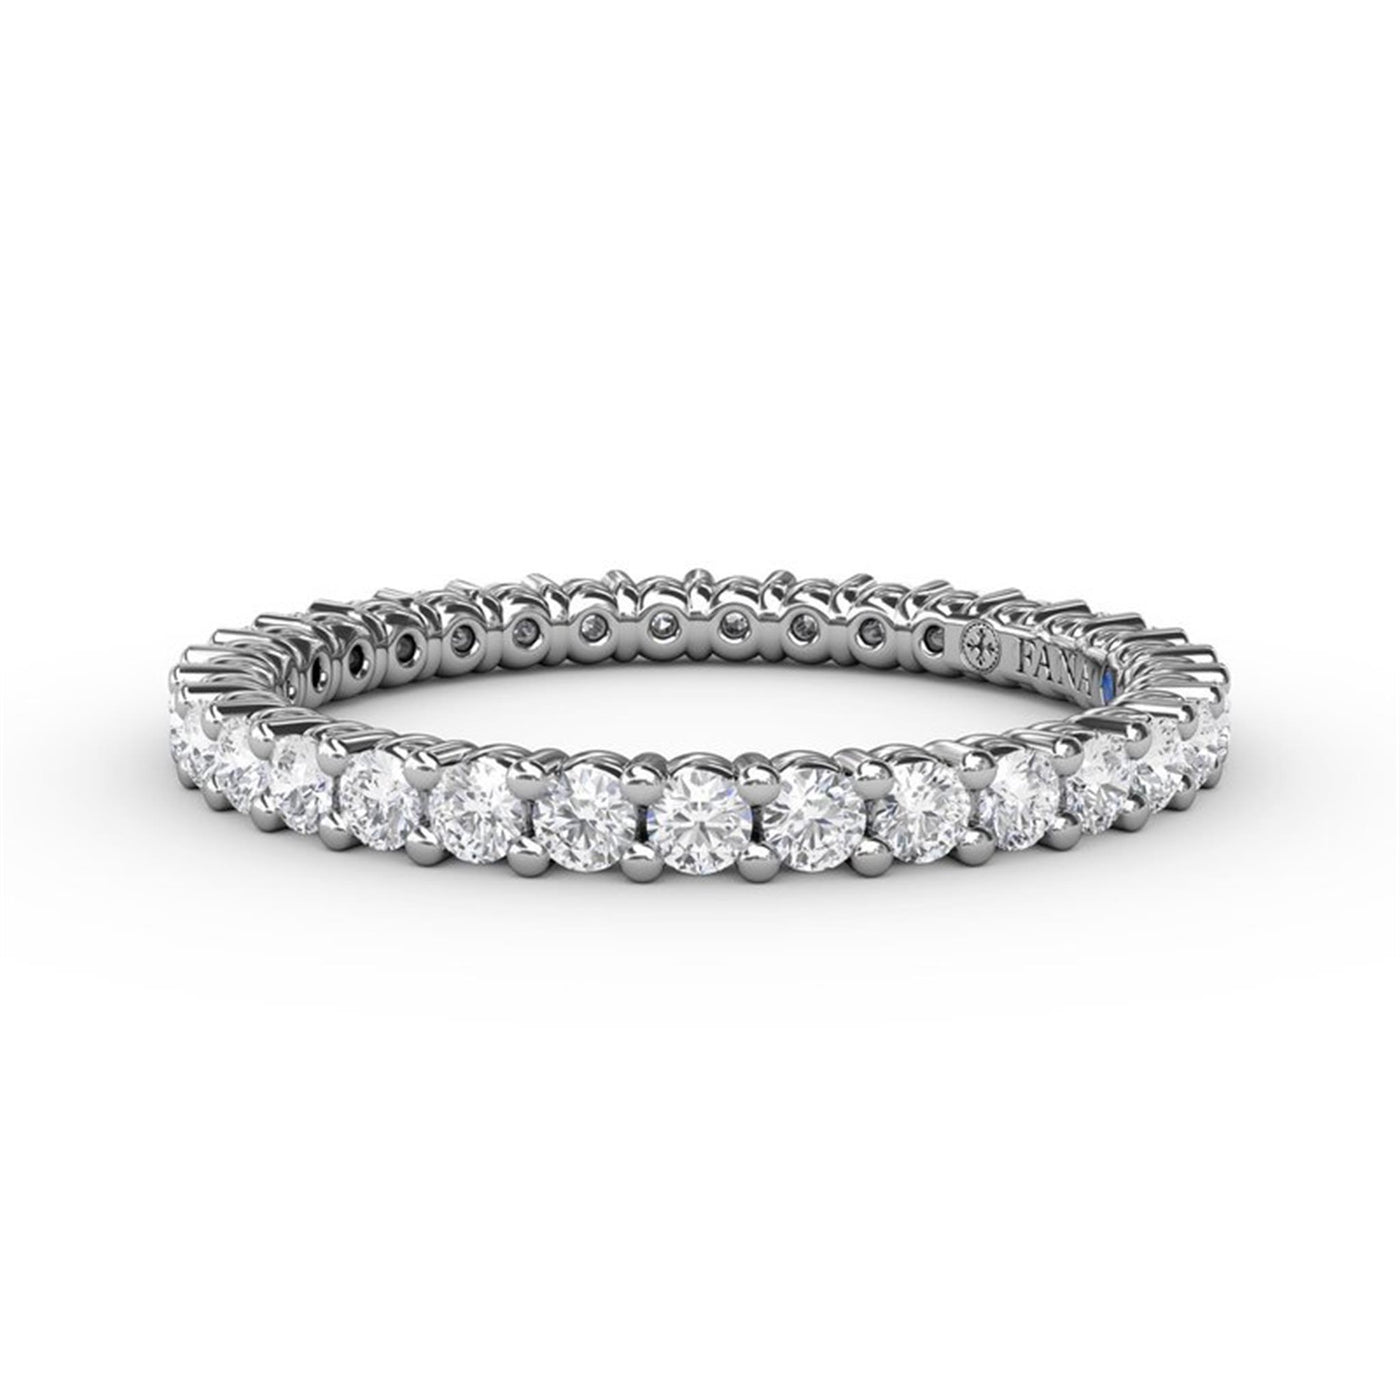 14K White Gold 0.75ctw Diamond Eternity Band 
Featuring a Polished Finish